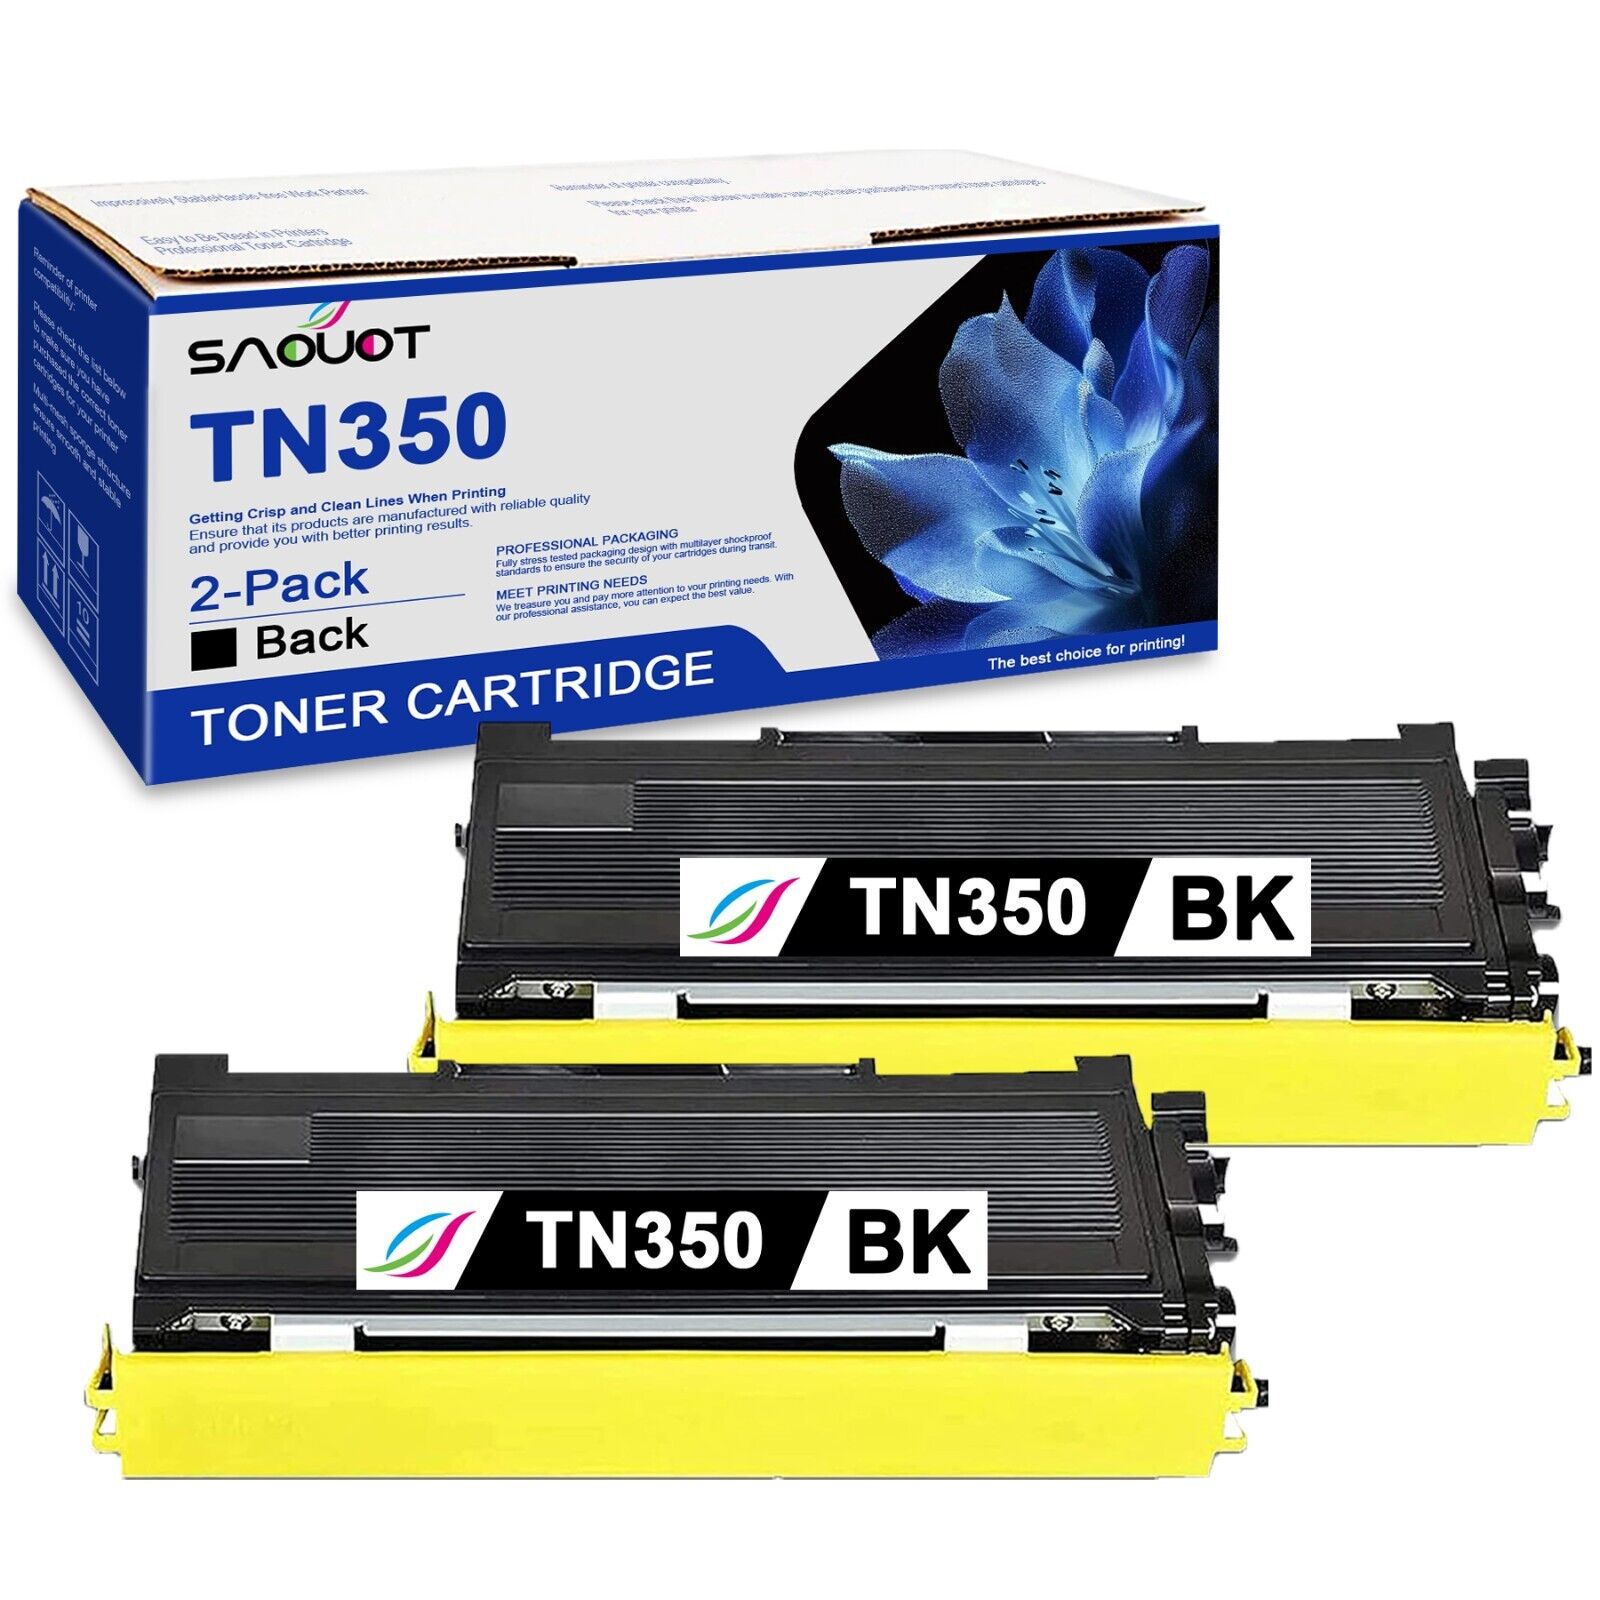 TN350 Toner Cartridge Black Replacement for Brother HL-2040 MFC-7220 DCP-7010